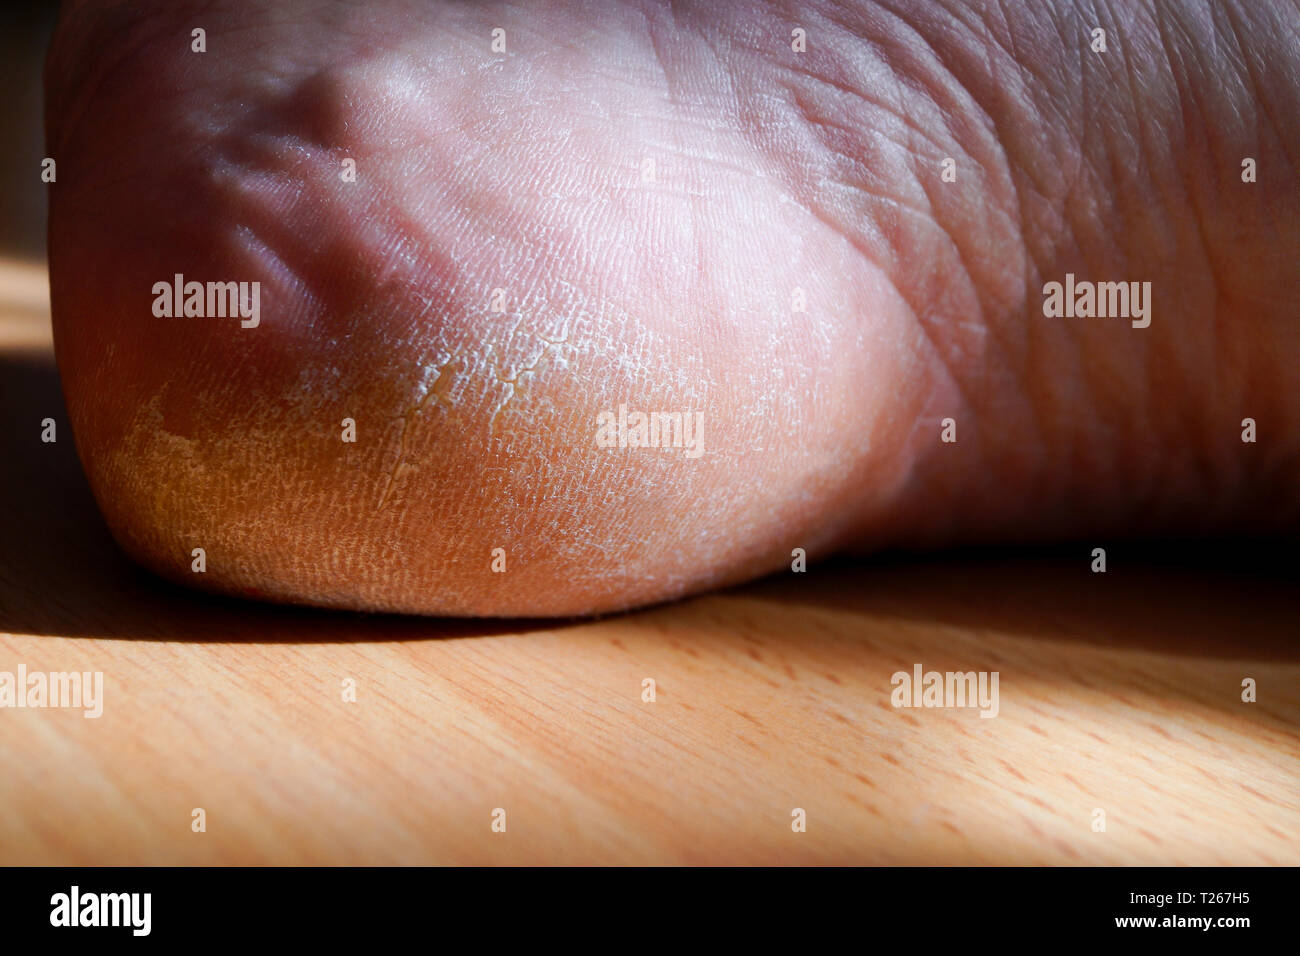 Closeup image of a heel on the foot with a white callus. Image for medical purposes. Stock Photo